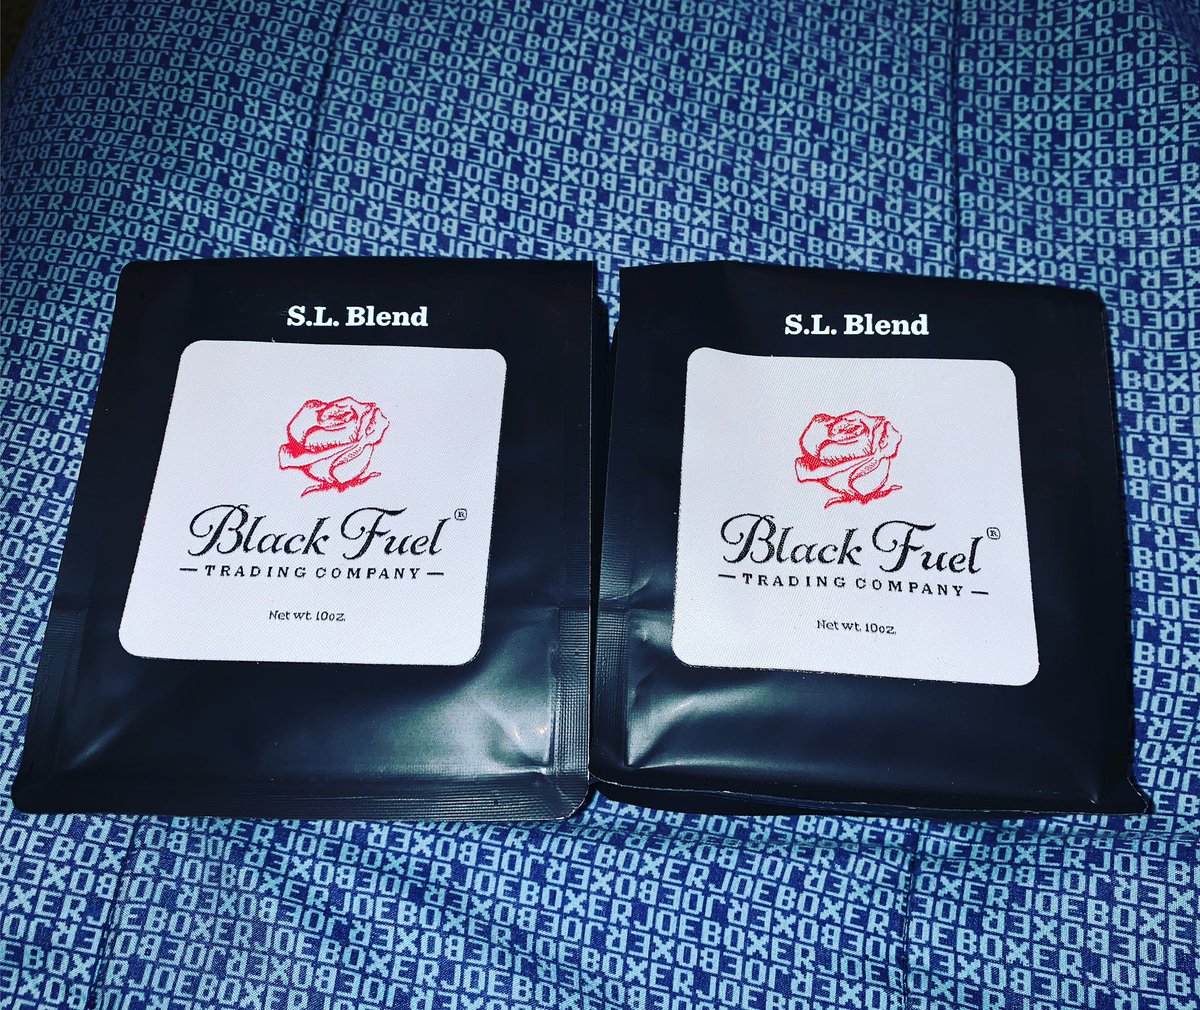 My bestest Black Friday purchase came. @blackfuel by @shannonleto. I’m addicted. ❤️ #essentialsforliving